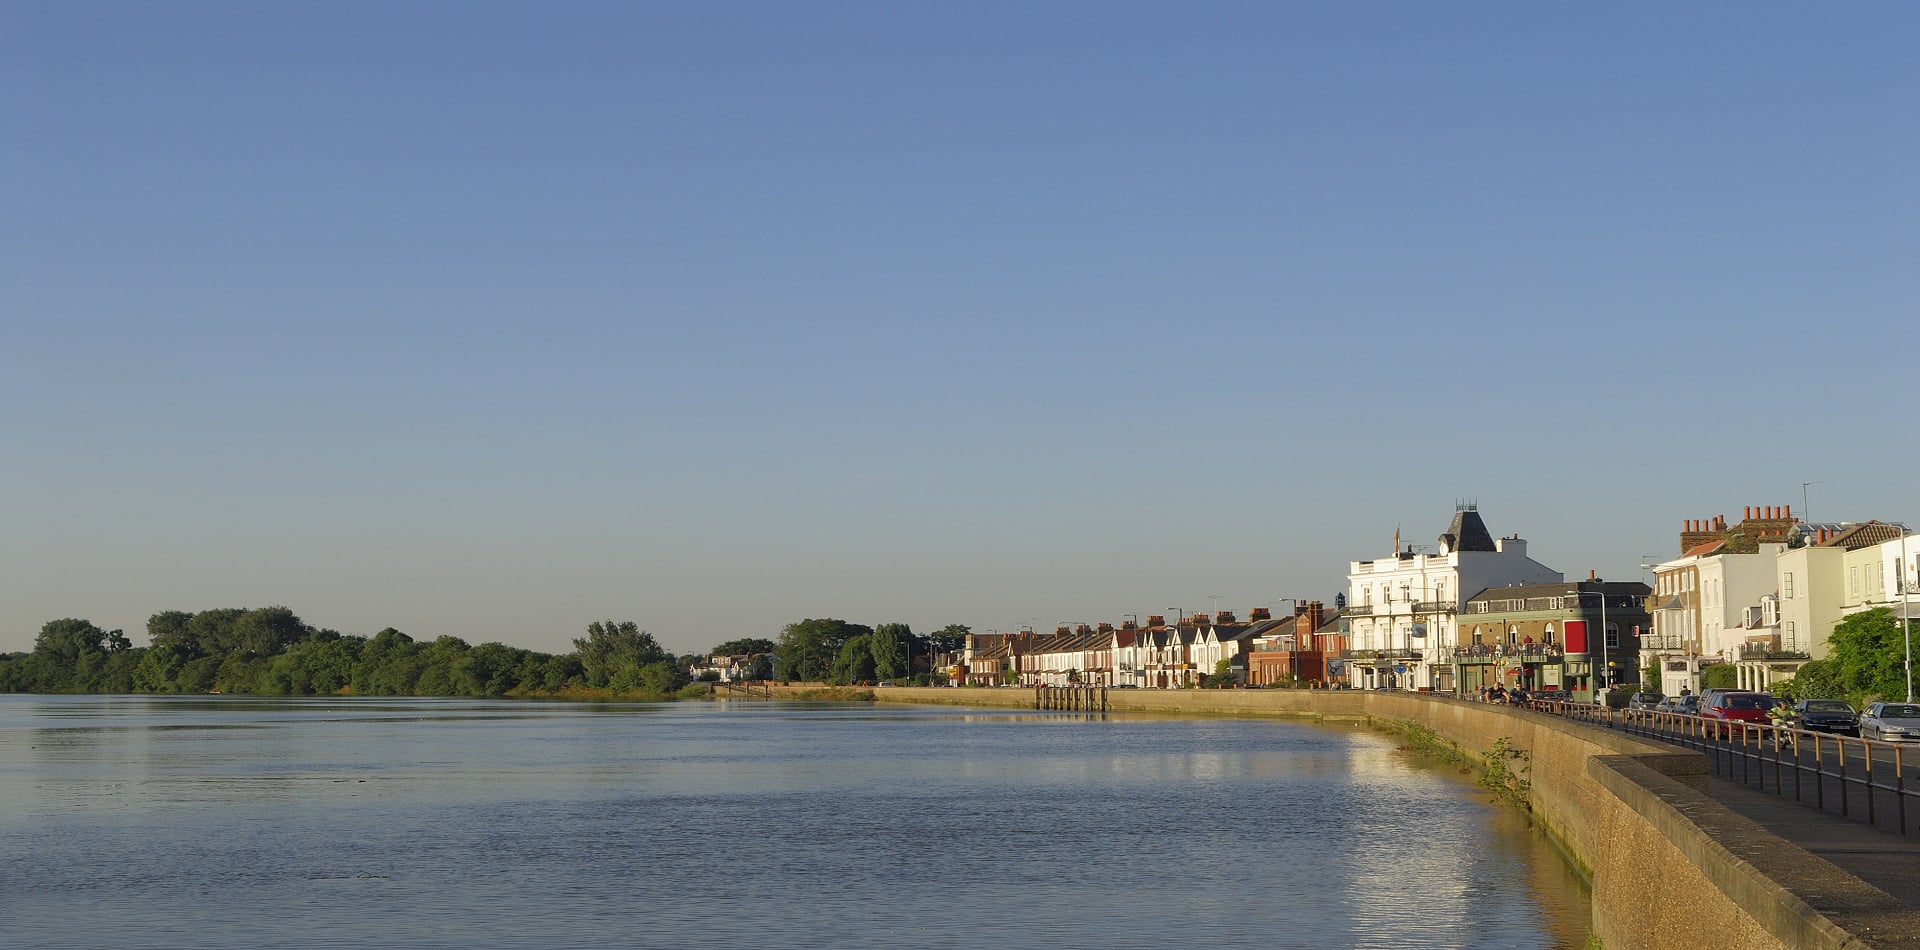 View of the RiverThames, London at Mortlake lit by the evening sun